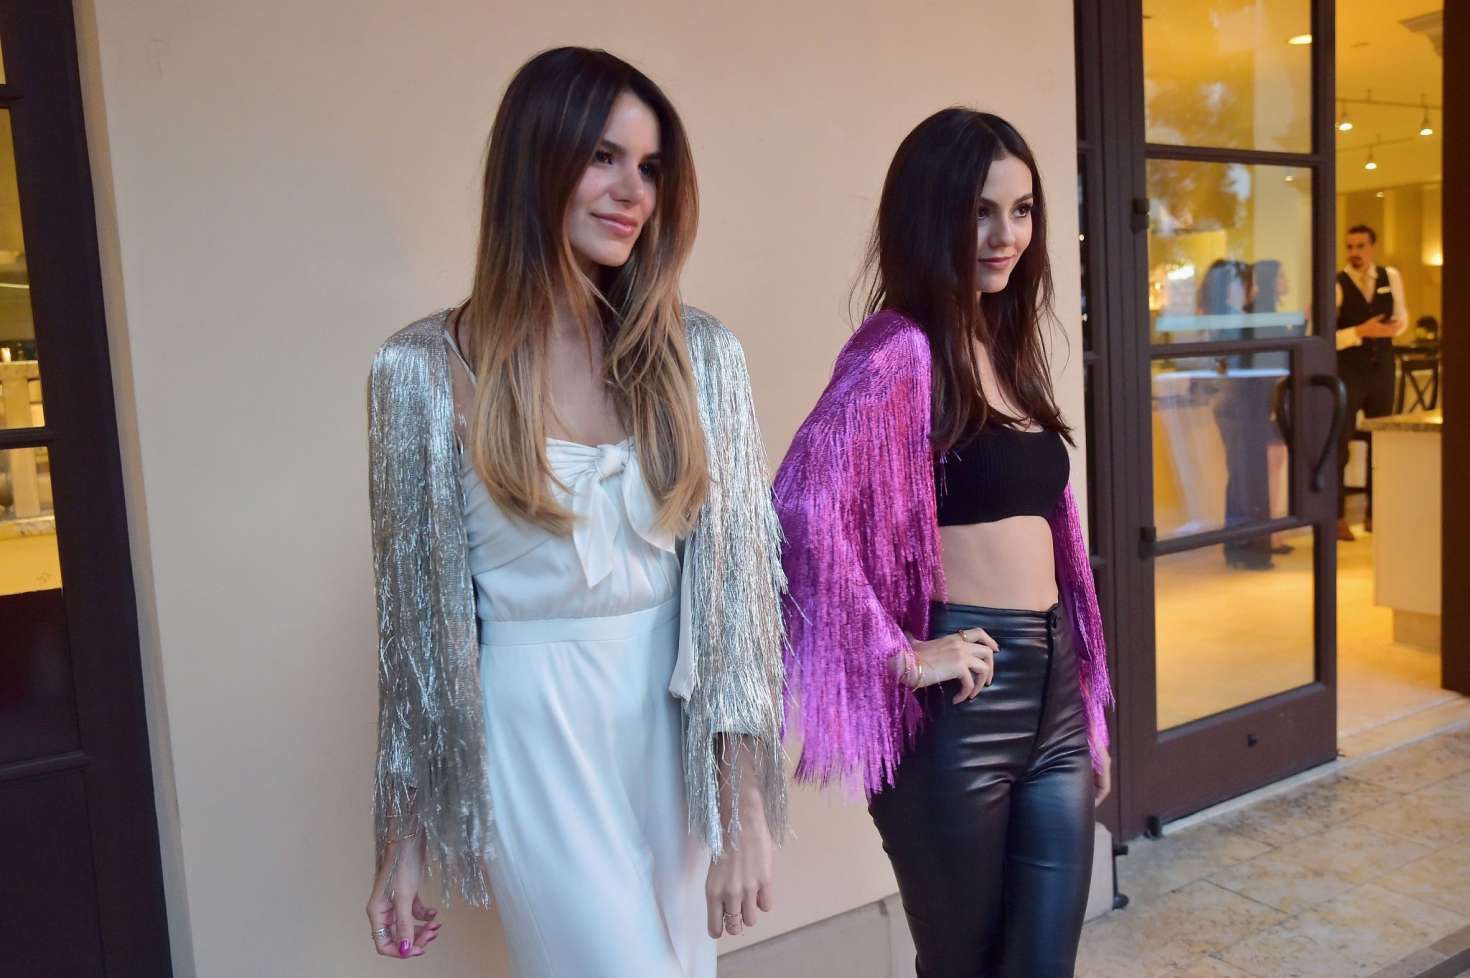 Victoria Justice Steps Out in Style For Box of Style by Rachel Zoe Dinner:  Photo 1223346, Victoria Justice Pictures